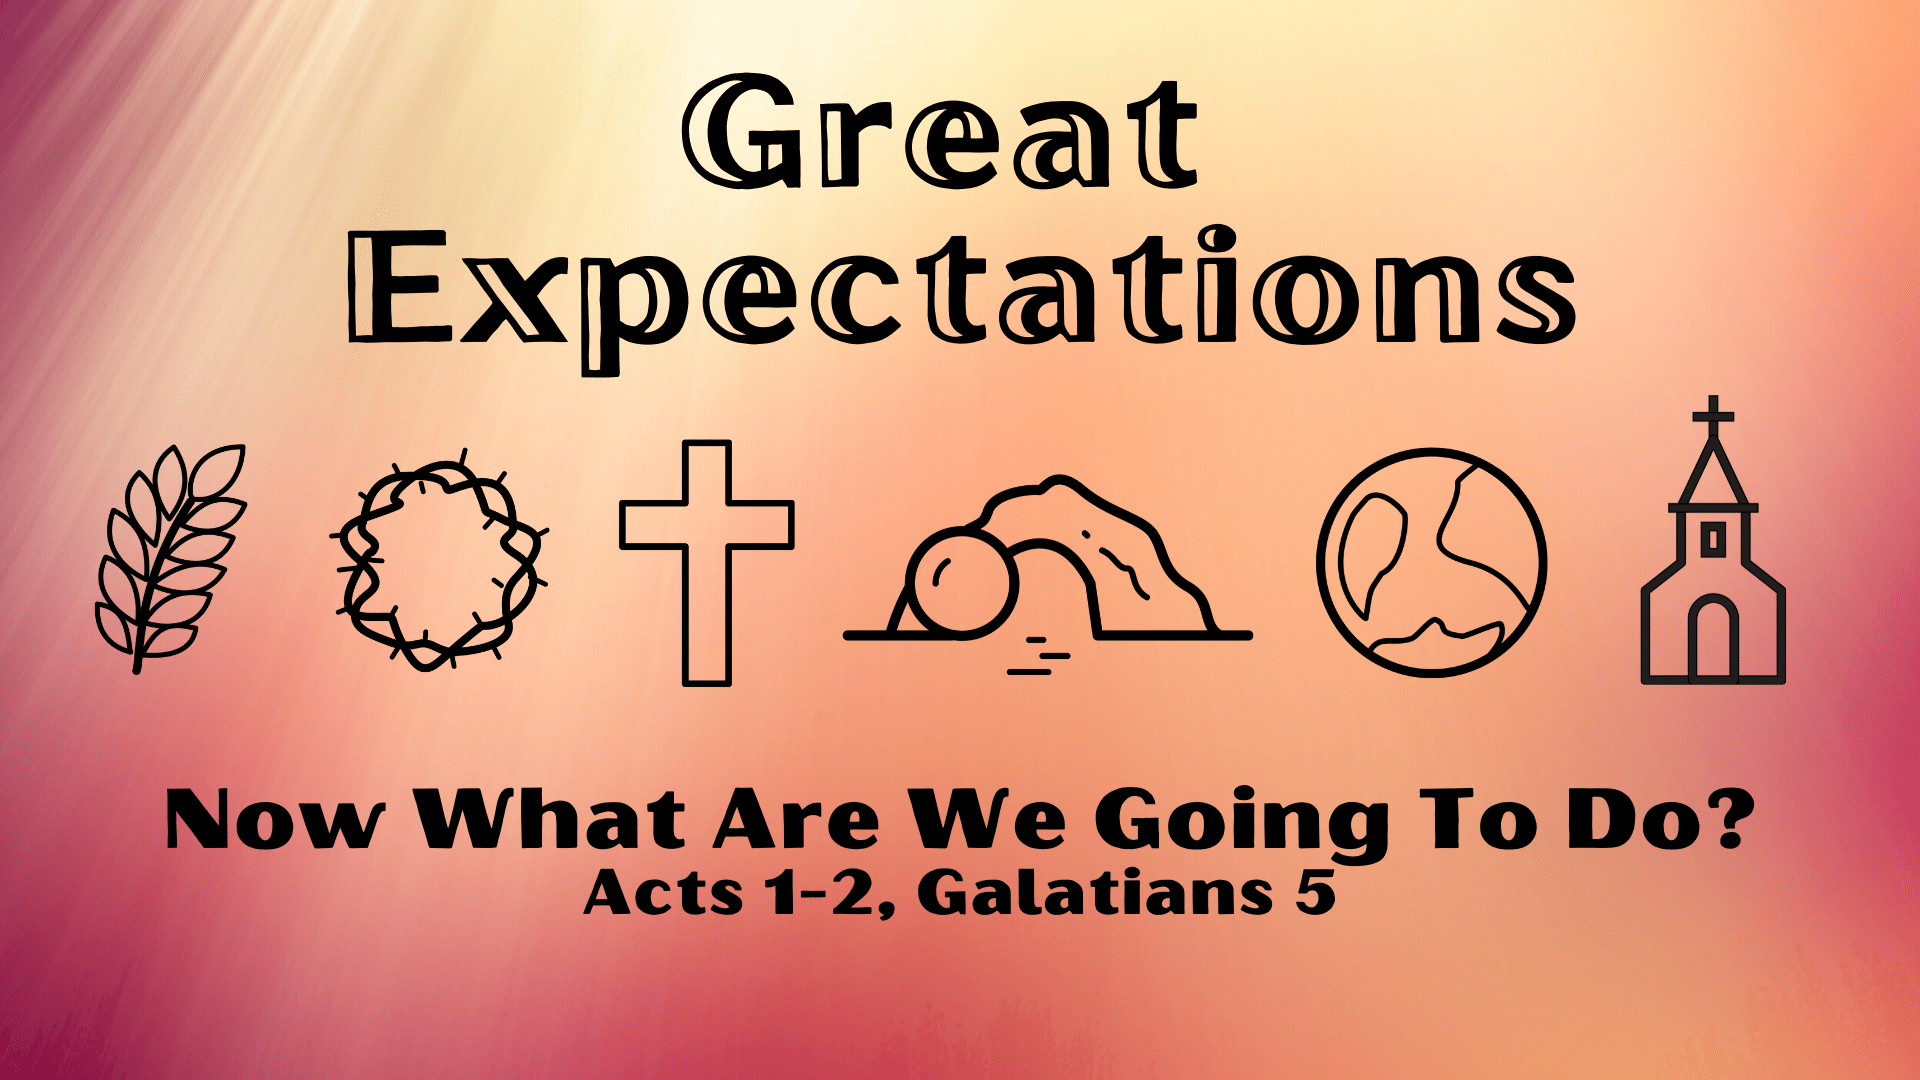 Great Expectations: Now What Are We Going To Do?